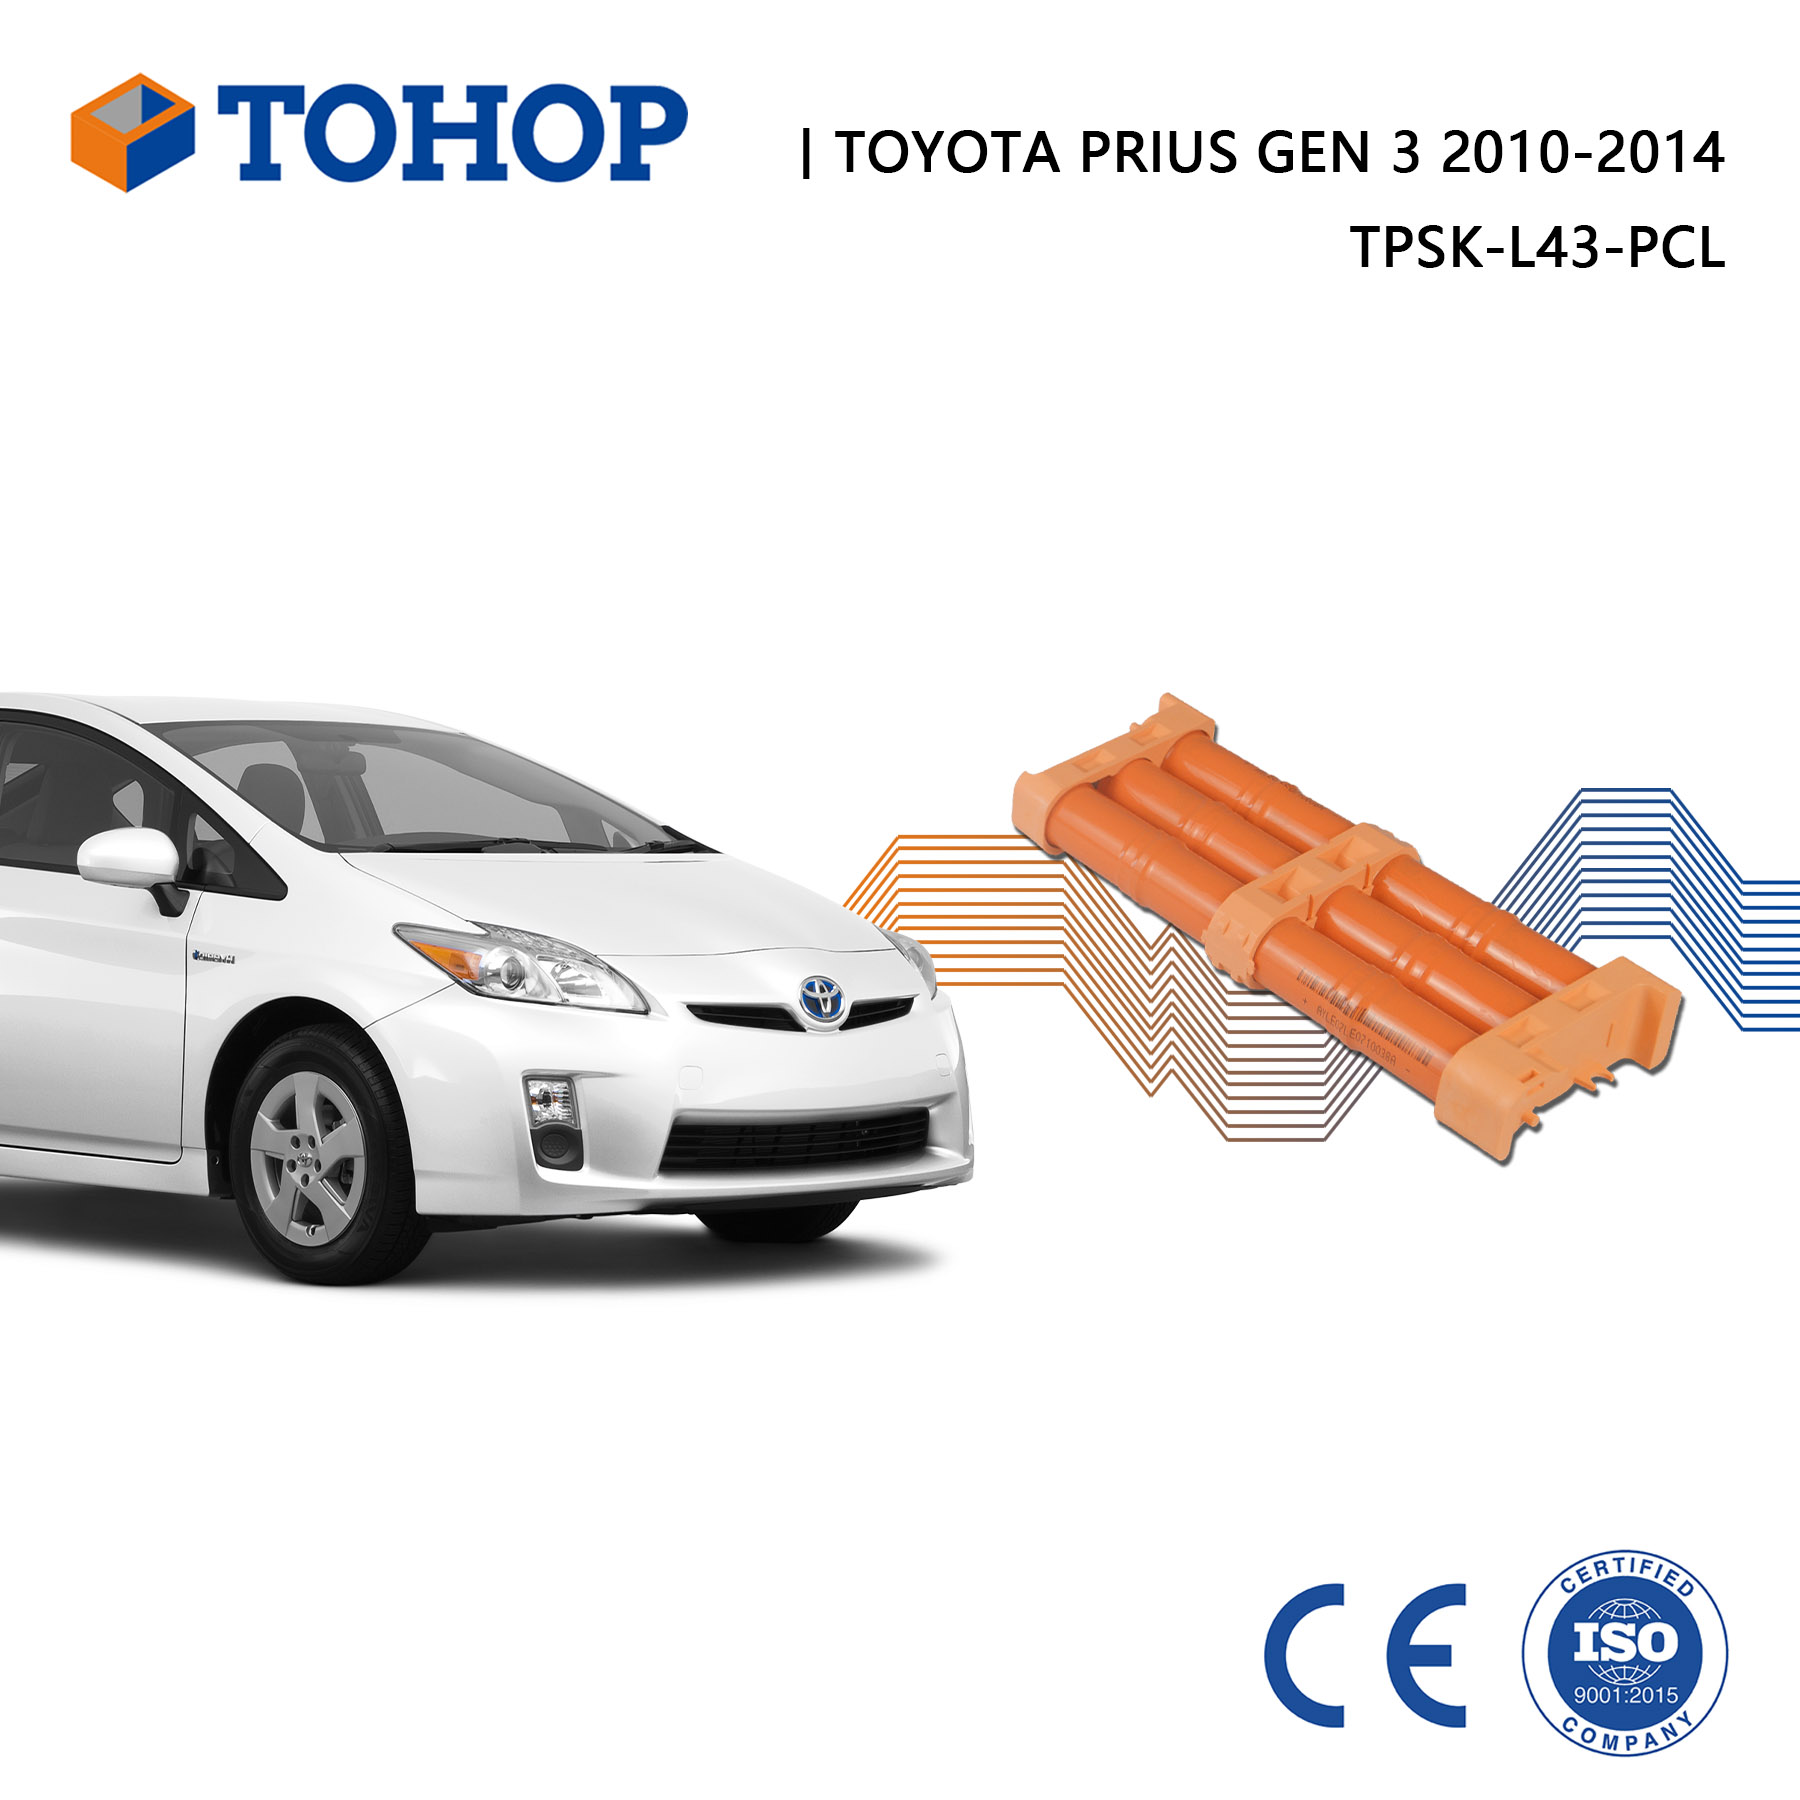 14.4V 6.5Ah Factory Direct Nimh replacement prius gen.3 hybrid battery